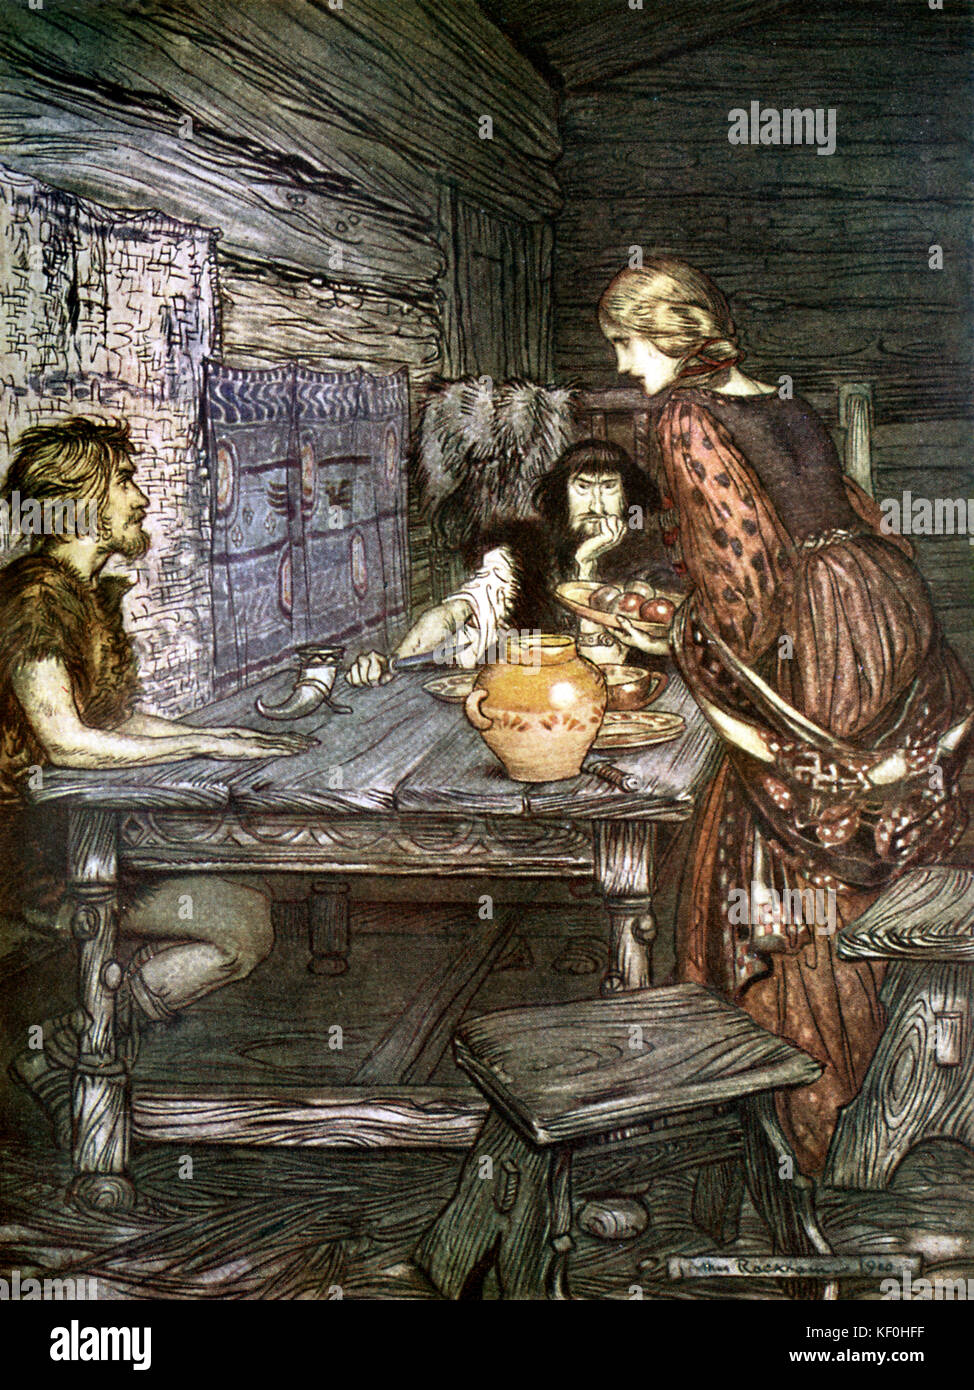 The Valkyrie / Das Walküre by Richard Wagner. Hunding and his wife Sieglinde offer hospitality to Siegmund, Sieglinde 's lost twin brother and son of Wotan.  Illustration by Arthur Rackham 1867 - 1939.  Caption:  'Hunding discovers the likeness between Siegmund and Sieglinde' Act 1.  From 'The Ring Cycle' / 'Der Ring des Nibelungen'.  RW German composer & author, 22 May 1813 - 13 February 1883. Stock Photo